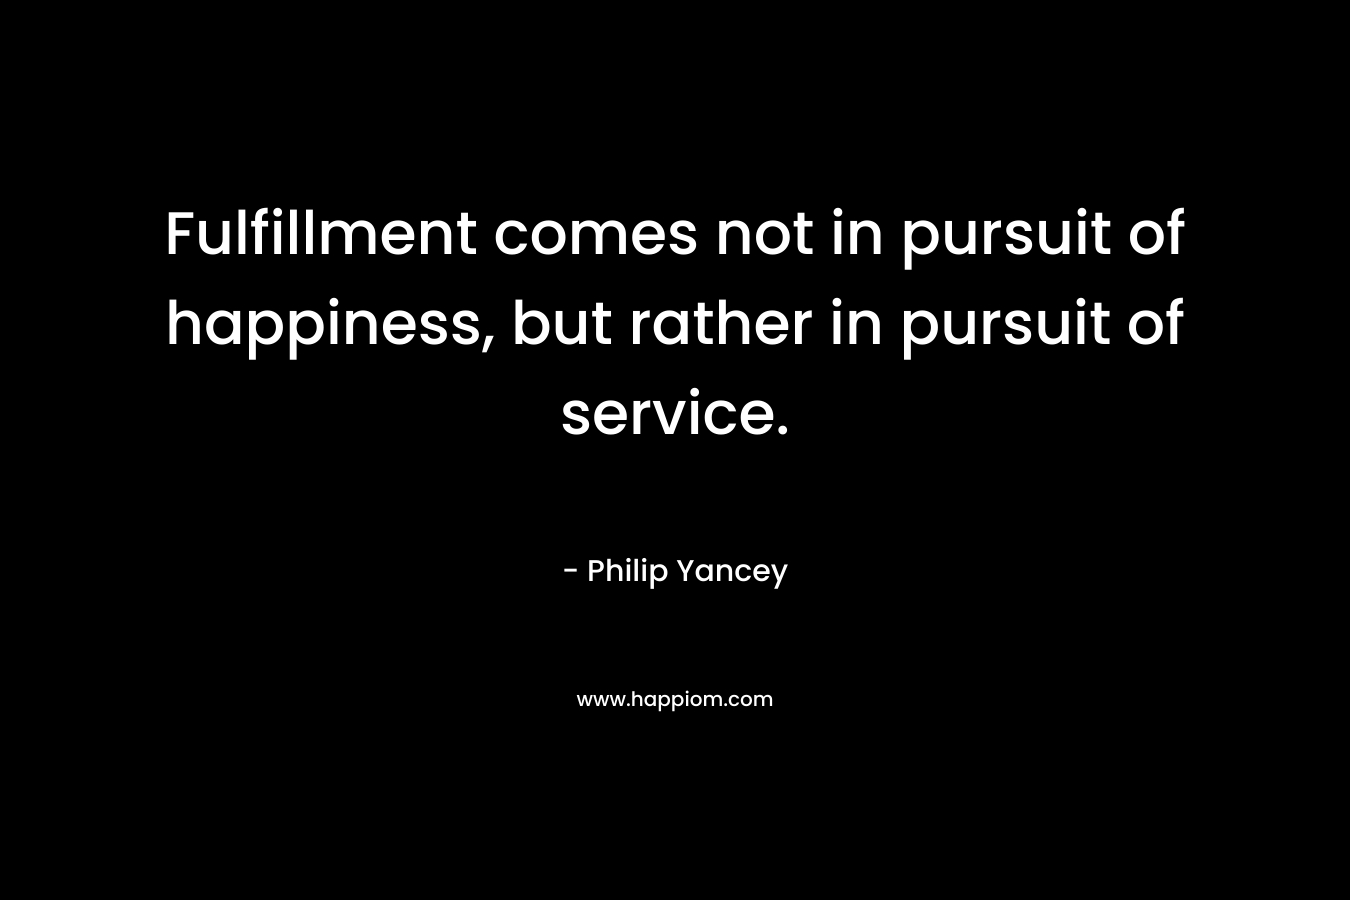 Fulfillment comes not in pursuit of happiness, but rather in pursuit of service.